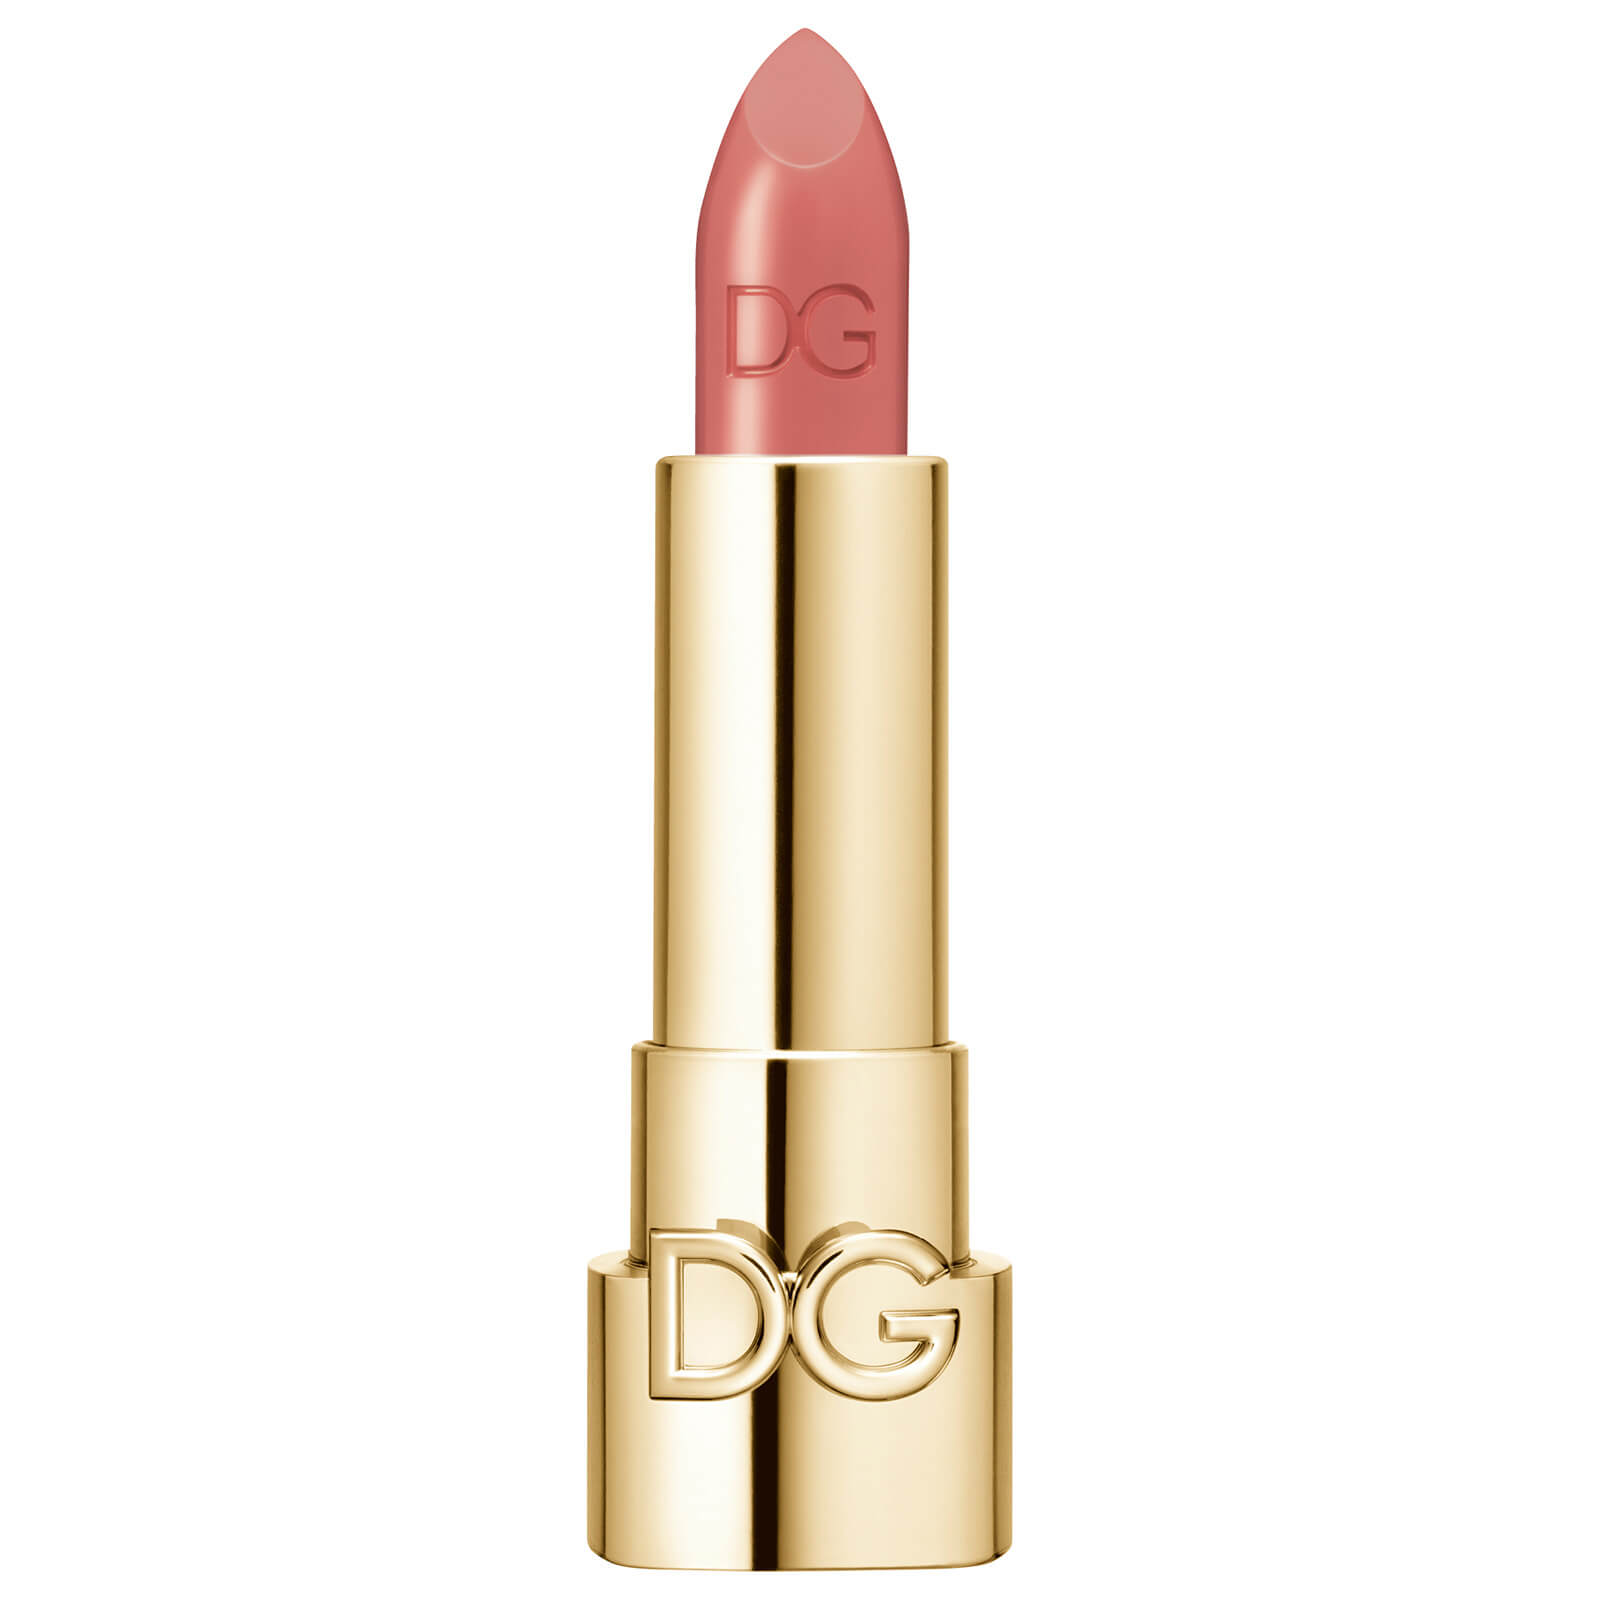 dolce&gabbana the only one lipstick 1.7g (no cap) (various shades) - 130 sweet honey